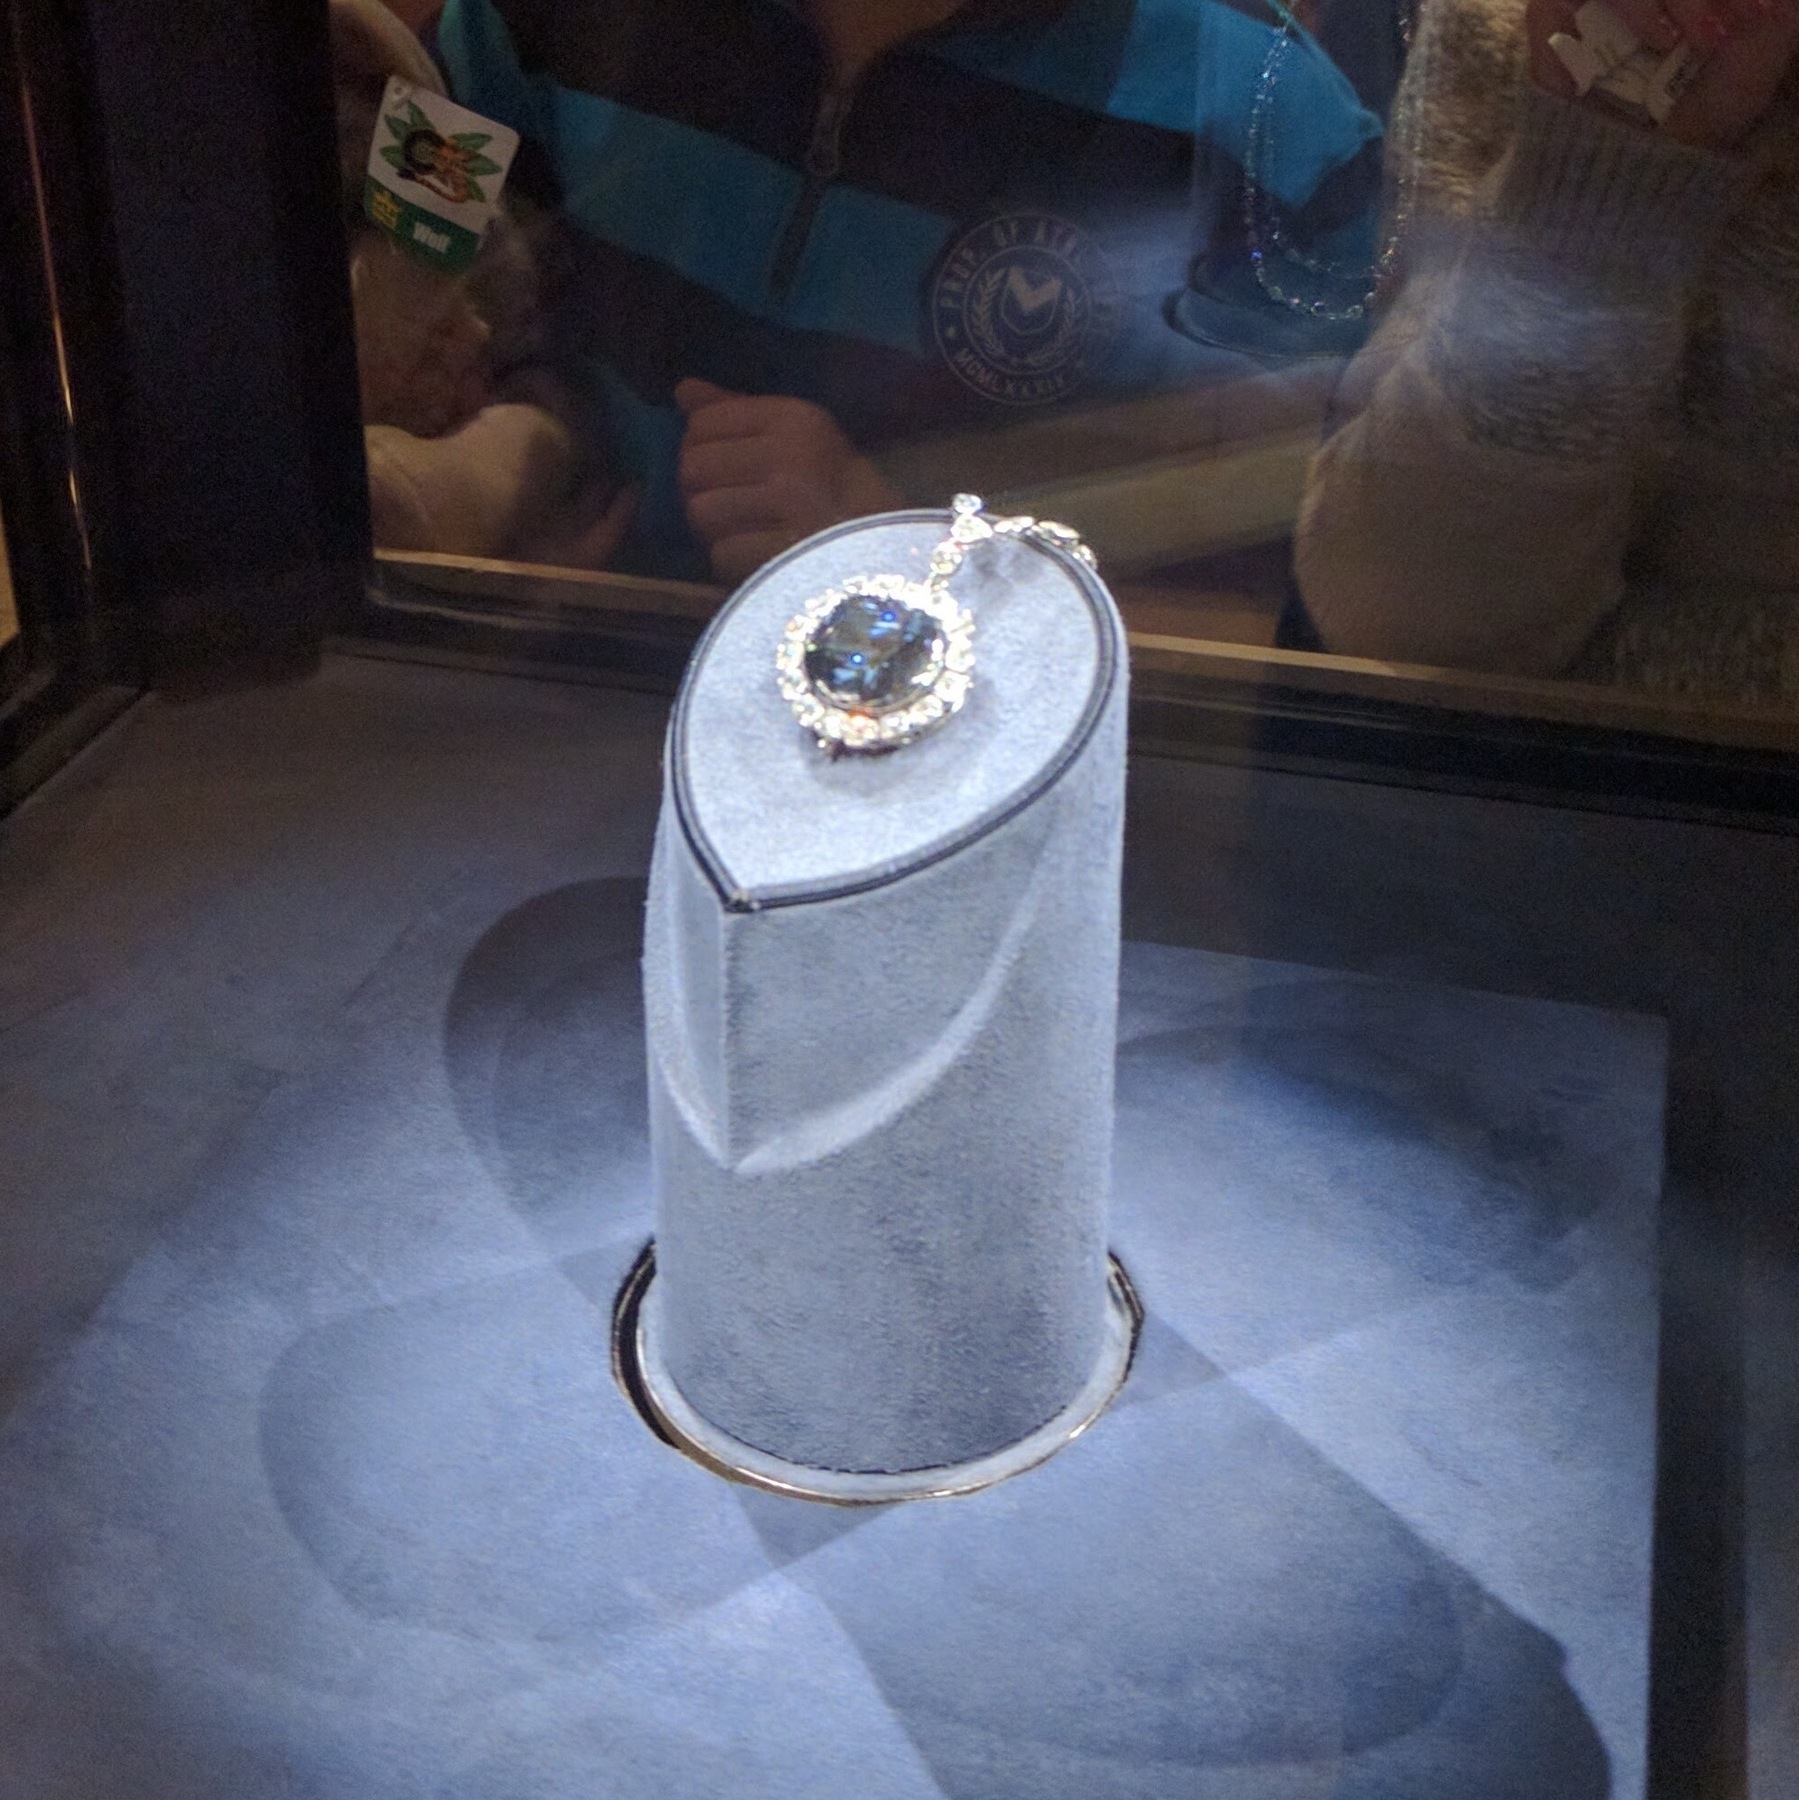 The Hope Diamond, a small diamond in a pendent under a glass cabinet